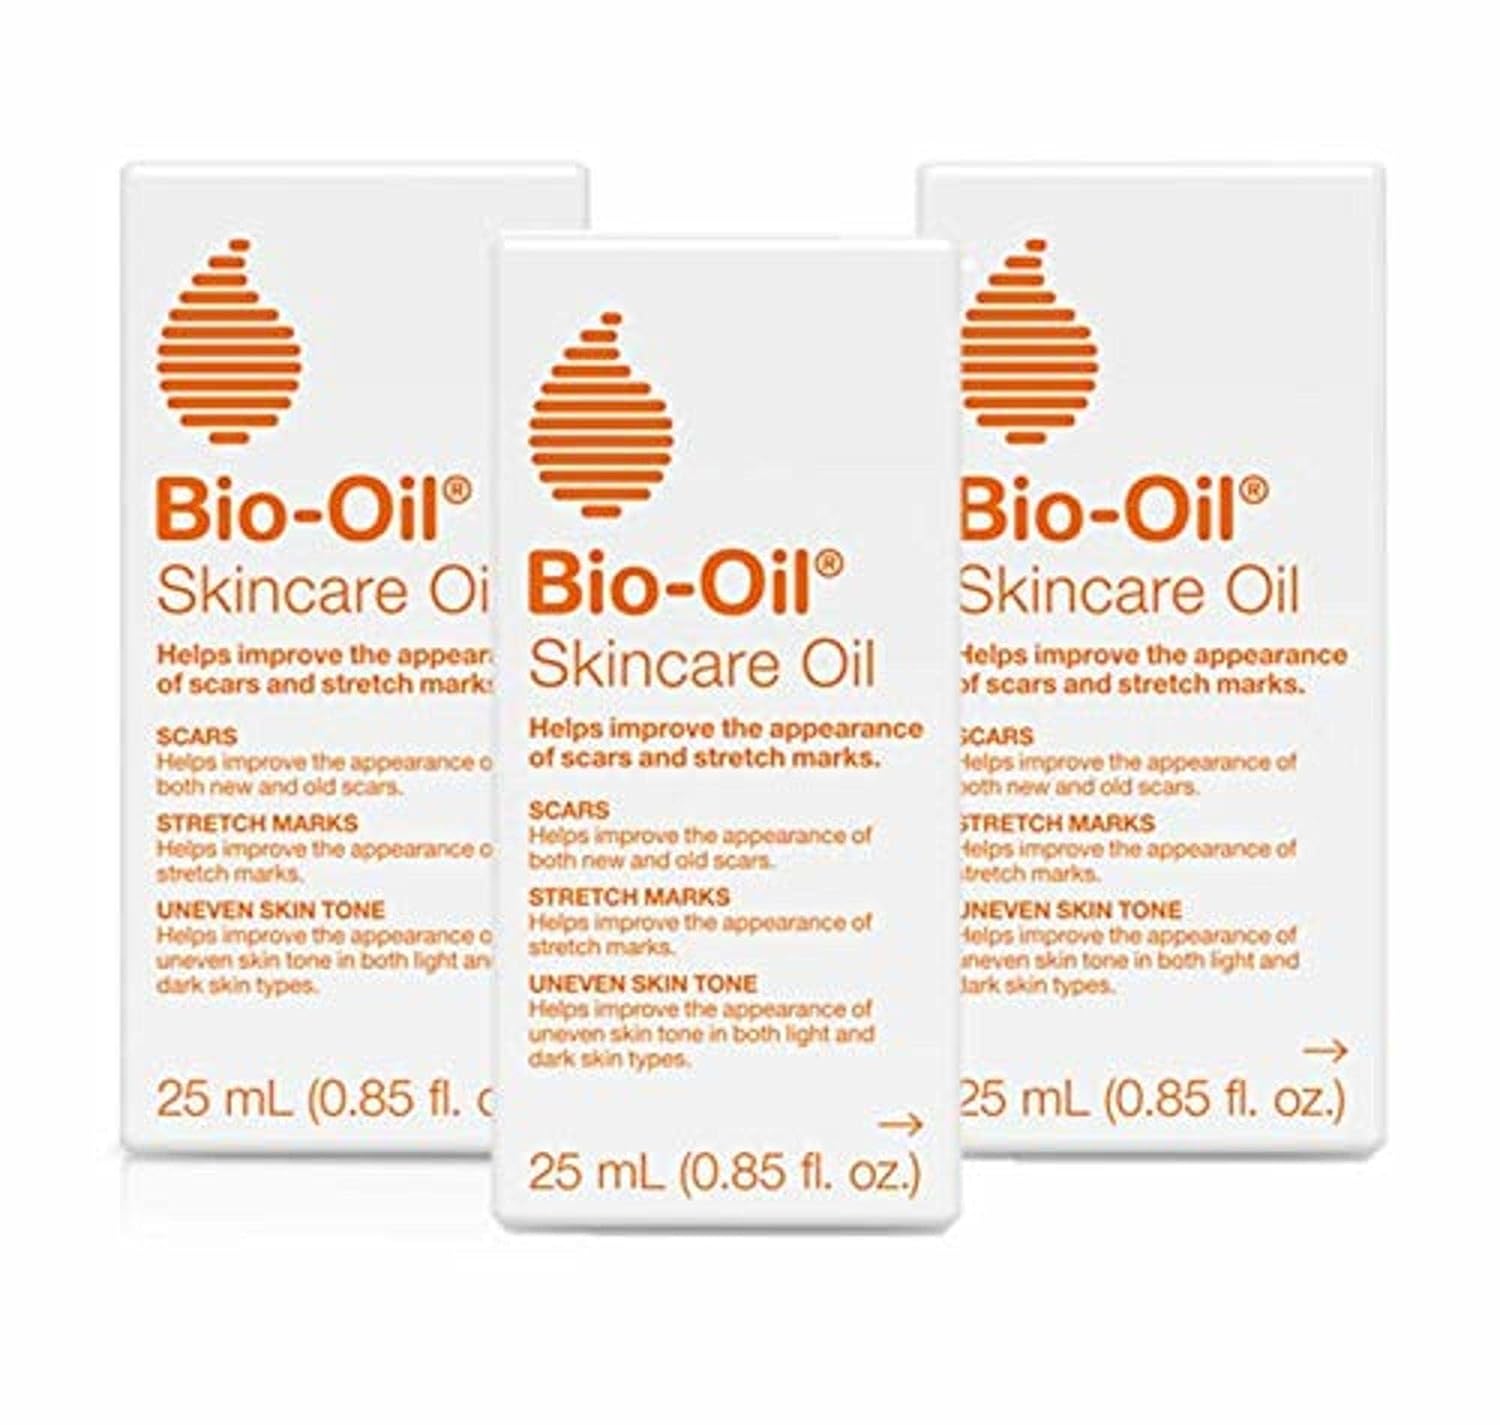 Bio-Oil Skincare Body Oil Serum for Scars and Stretch Marks, Body and Face Moisturizer, Dermatologist Recommended, Non-Comedogenic, Travel Size, For All Skin Types, Vitamin A, E, 0.85 , Pack of 3